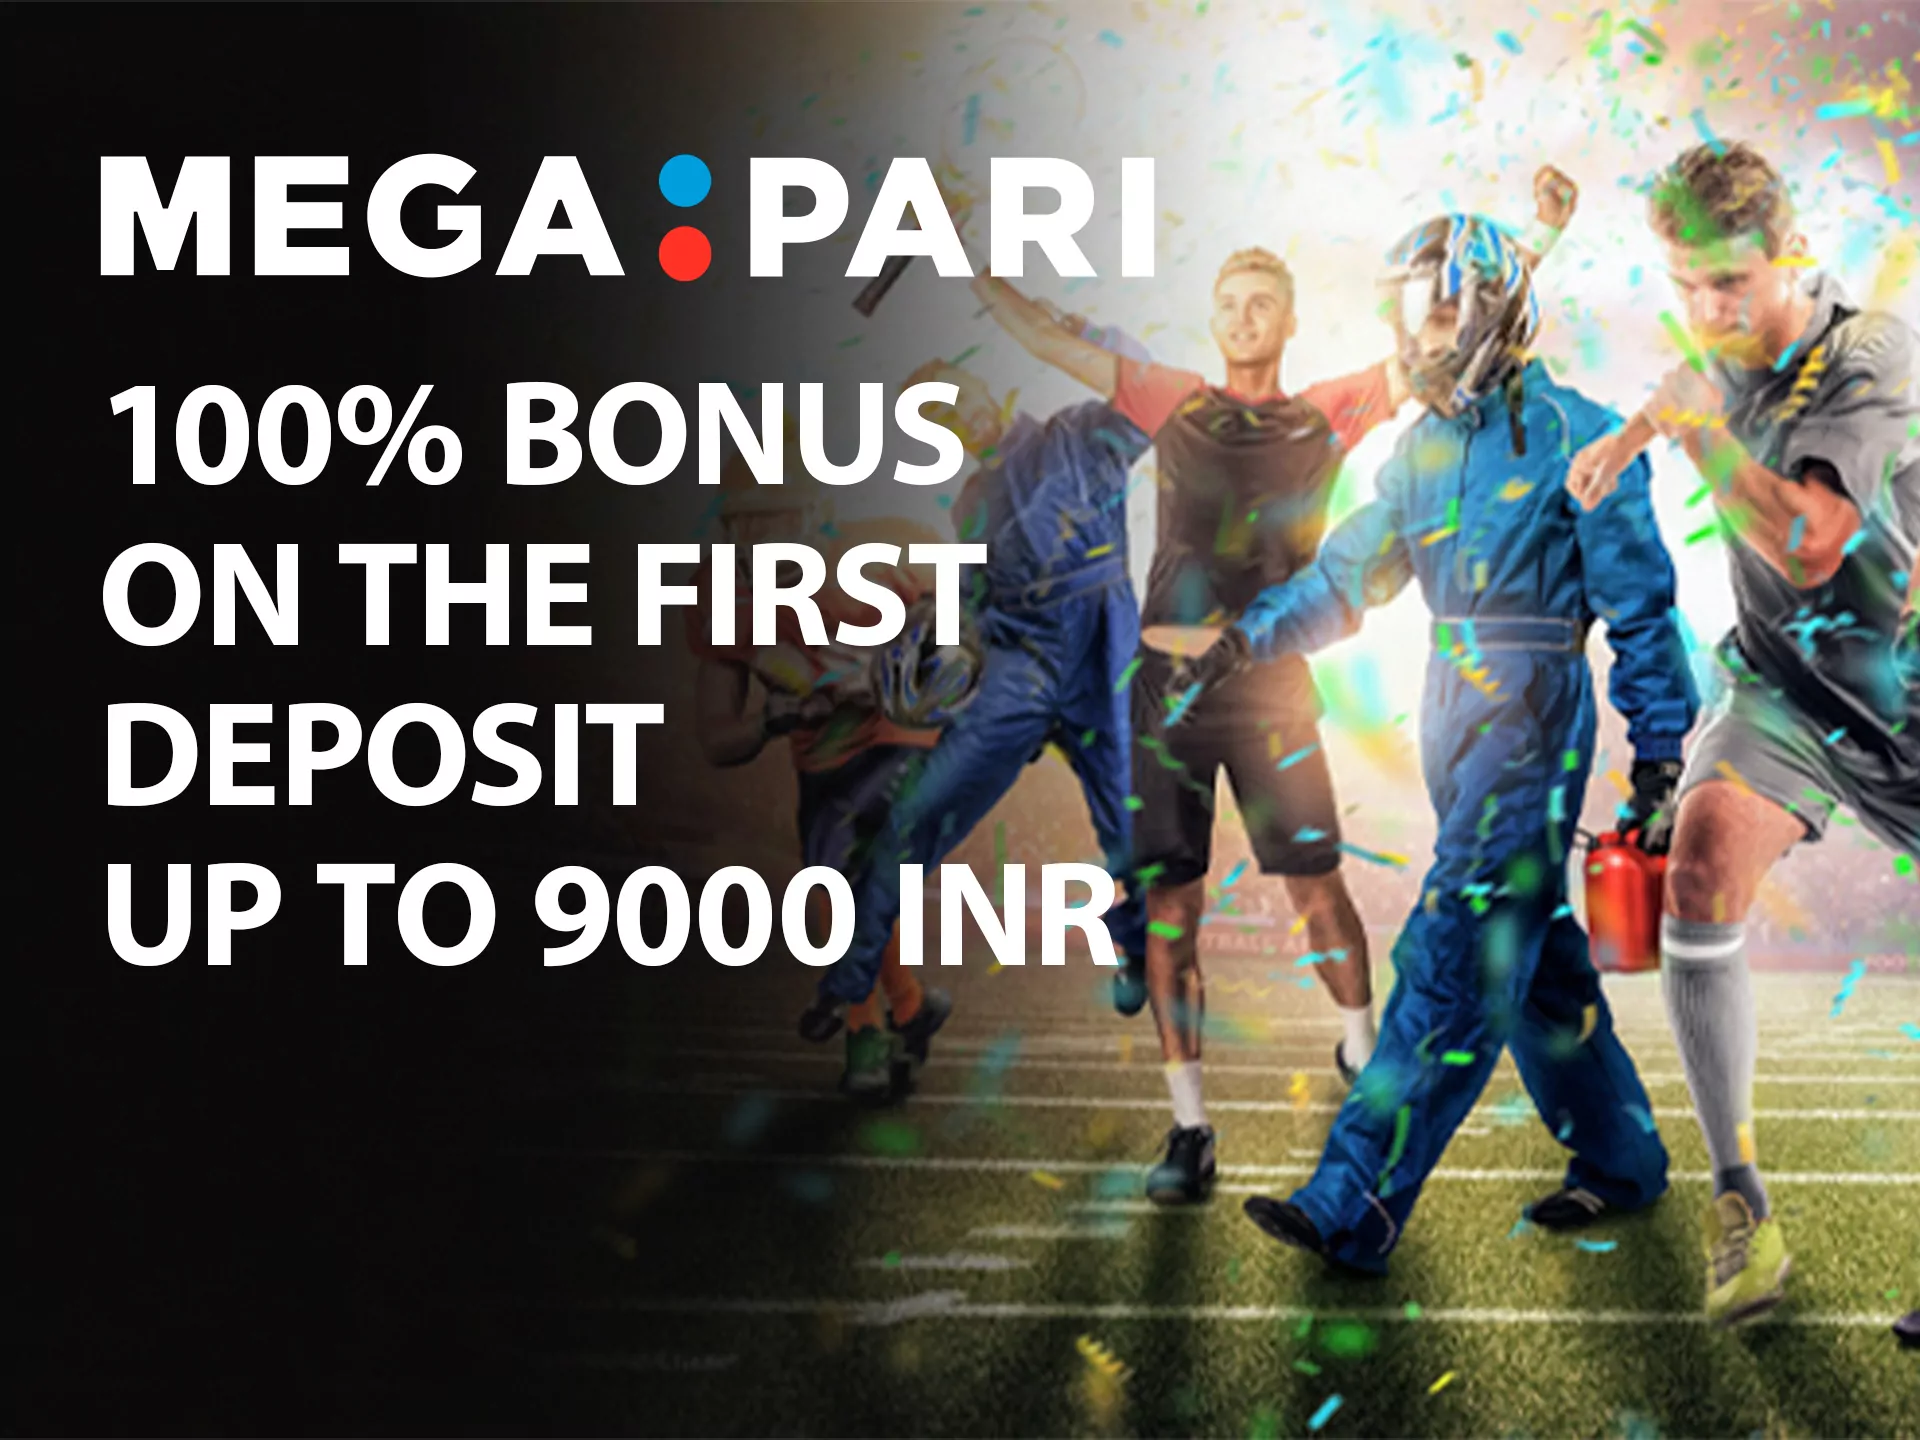 Get your welcome bonus on the first deposit.